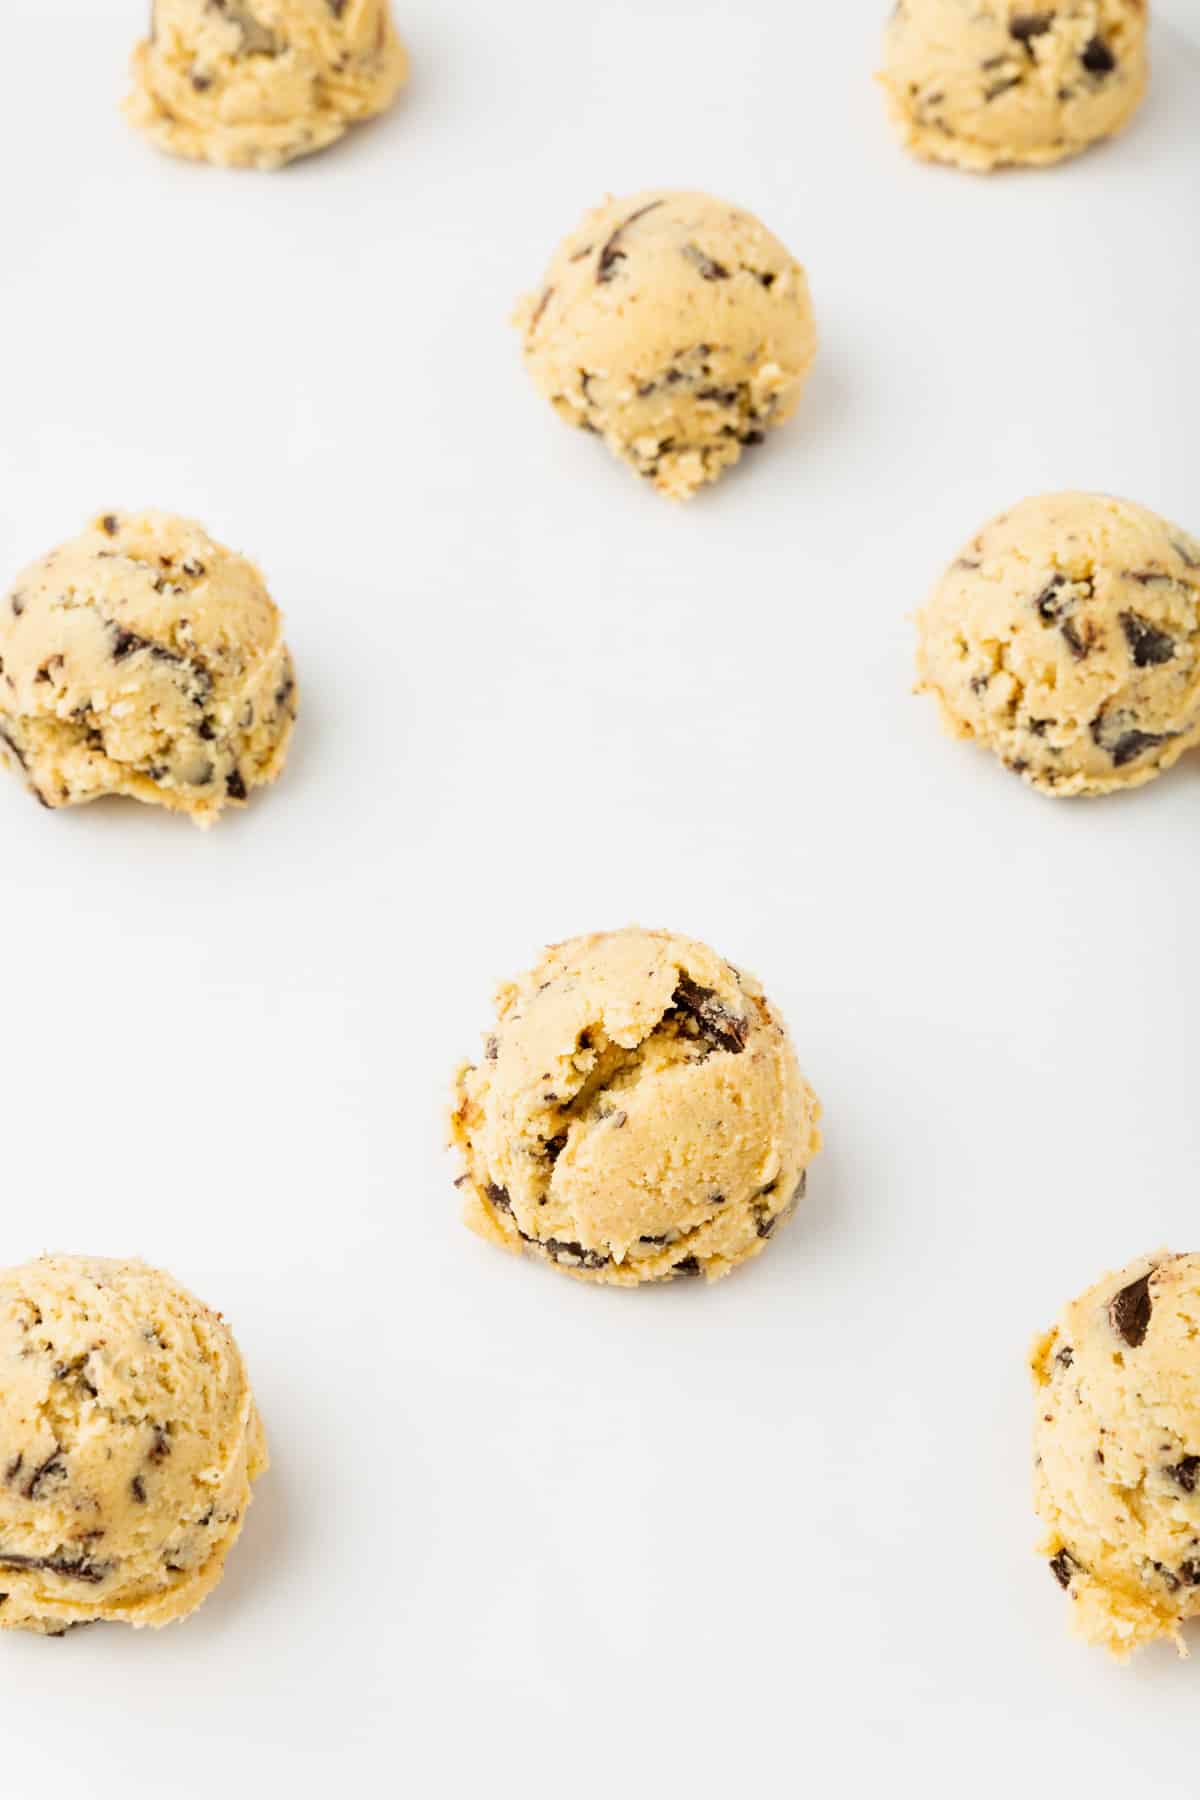 Gluten-free chocolate chip cookie dough balls on parchment paper.